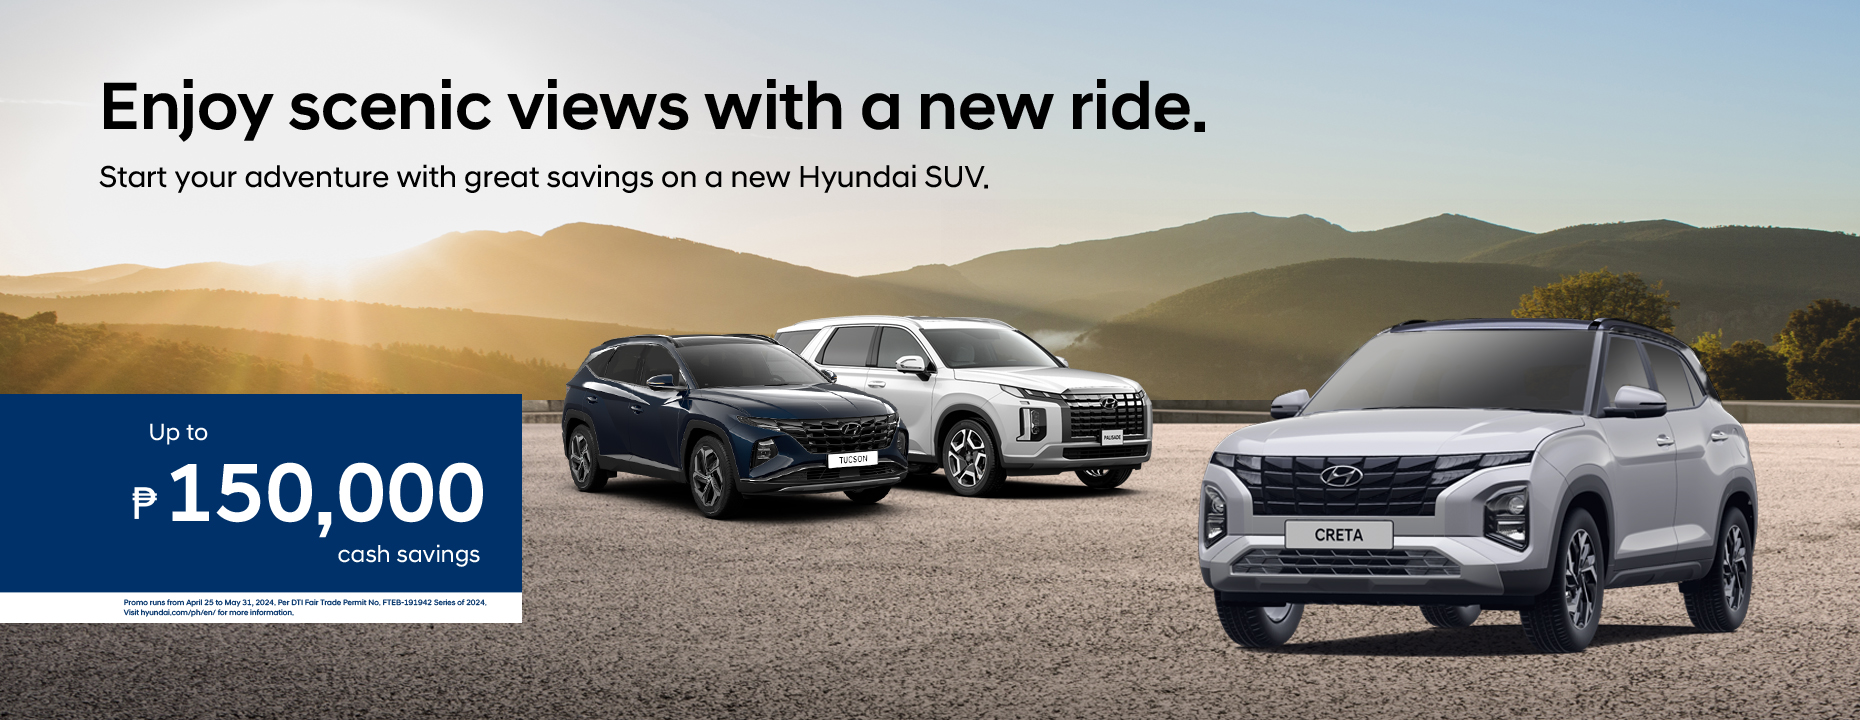 hyundai crossover vehicles in a festive background with sales promo details